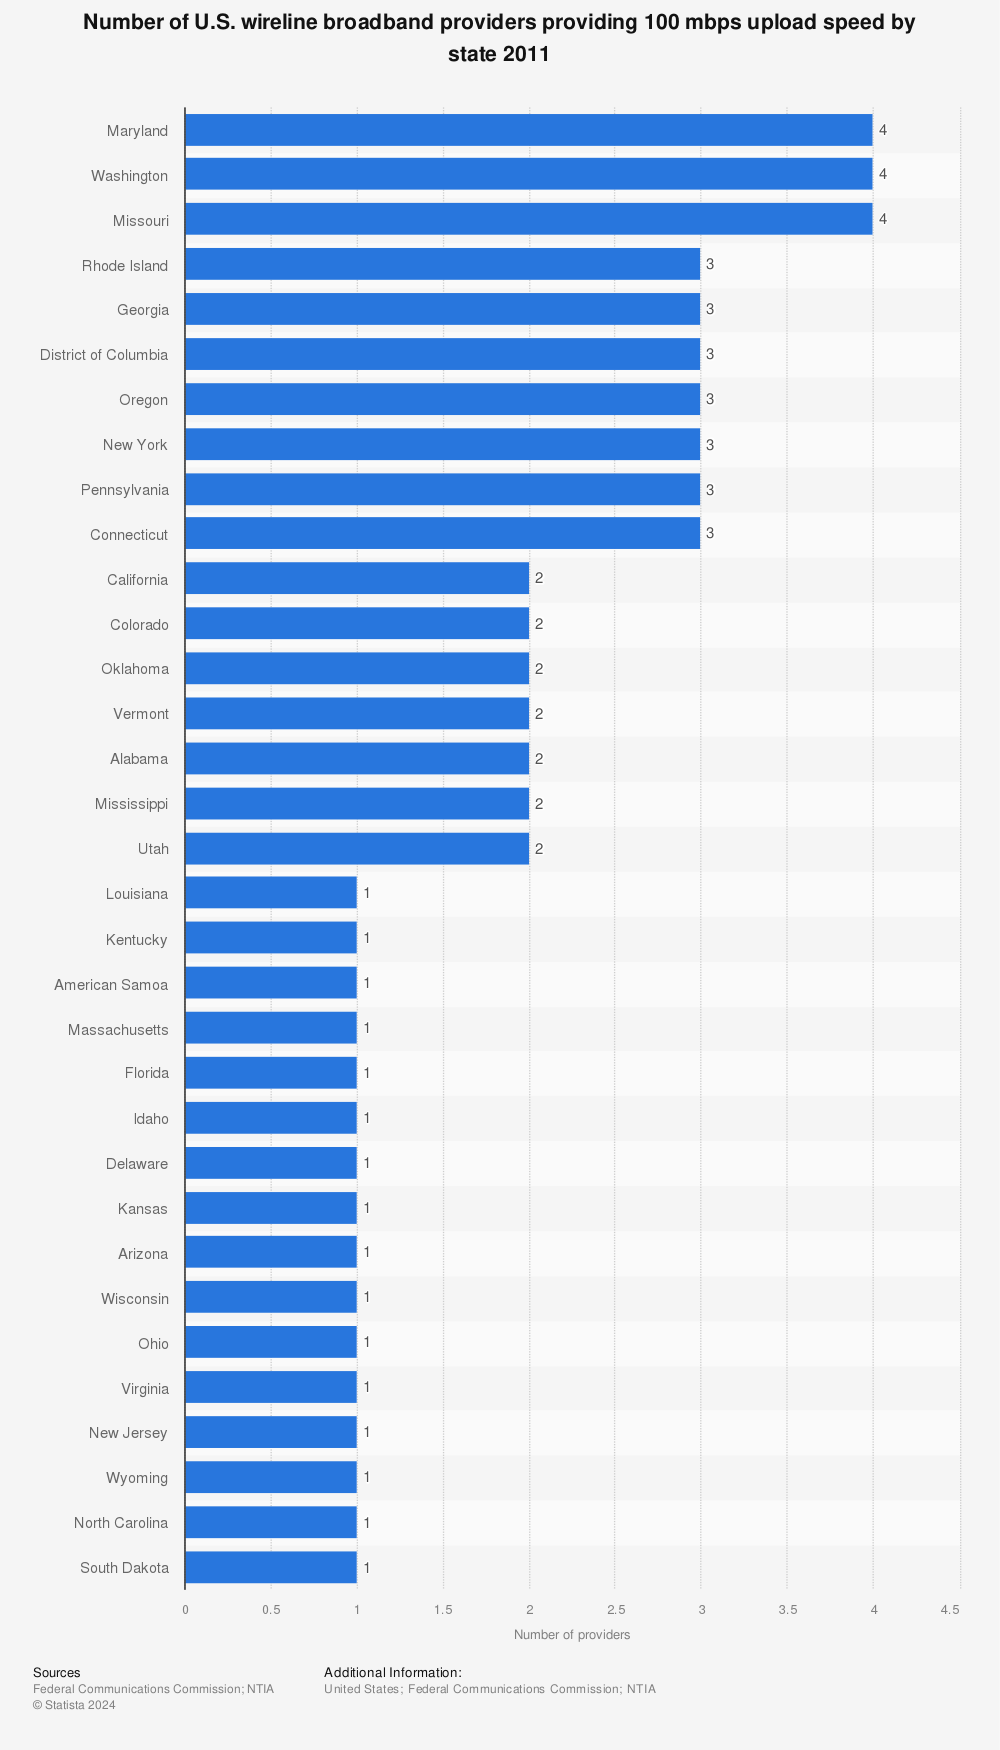 Statistic: Number of U.S. wireline broadband providers providing 100 mbps upload speed by state 2011 | Statista